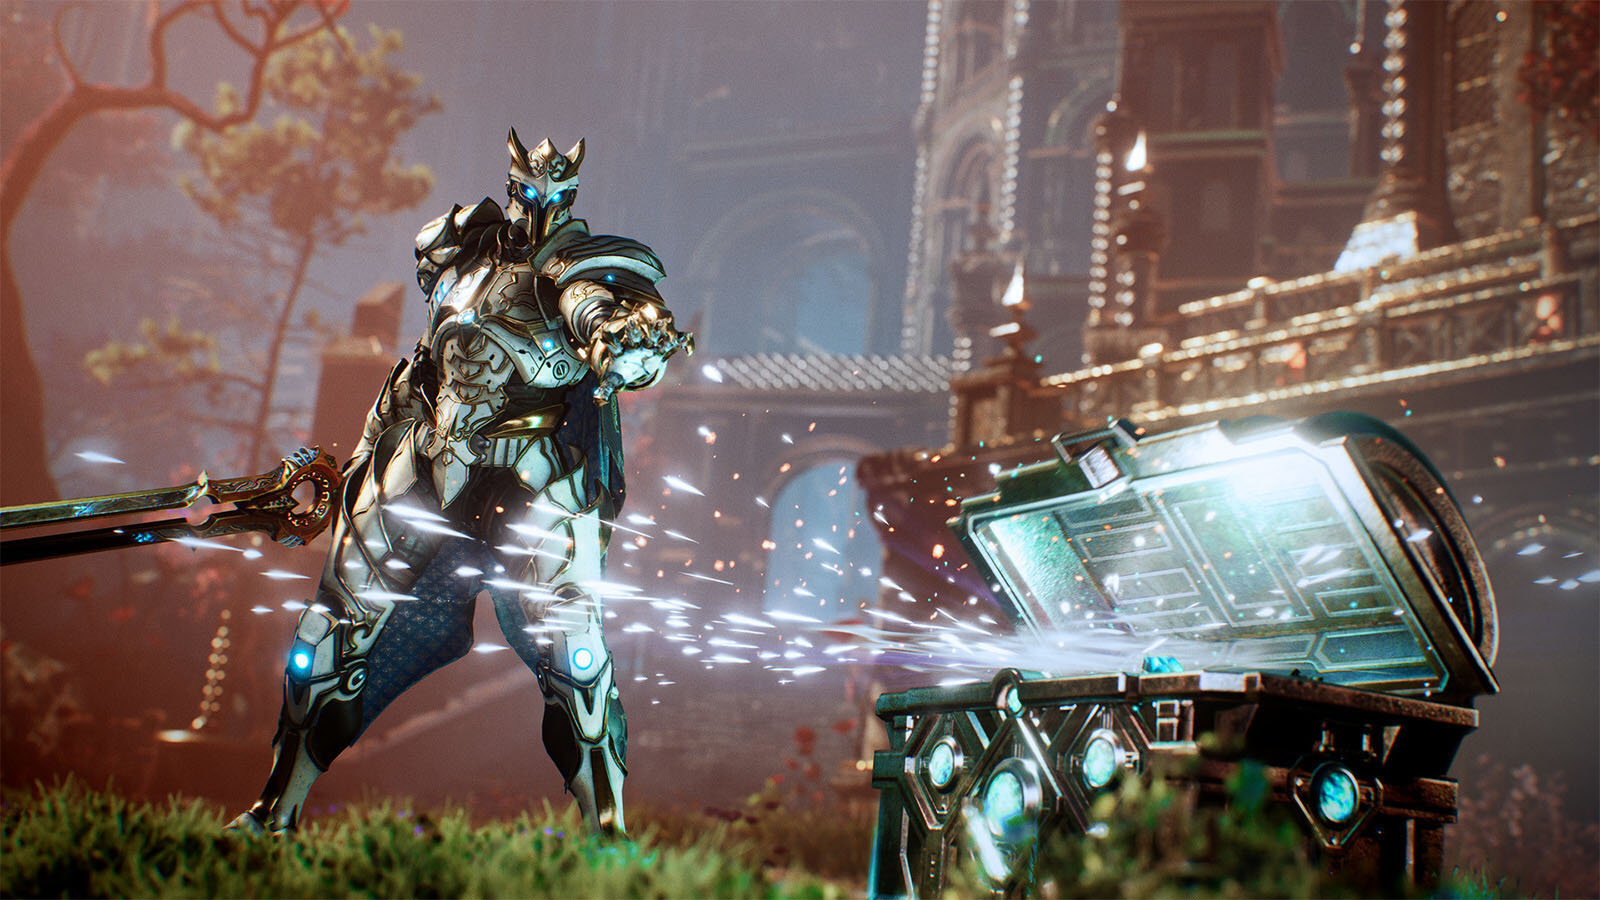 An image of an armored warrior approaching a glowing treasure chest, from the game Godfall.